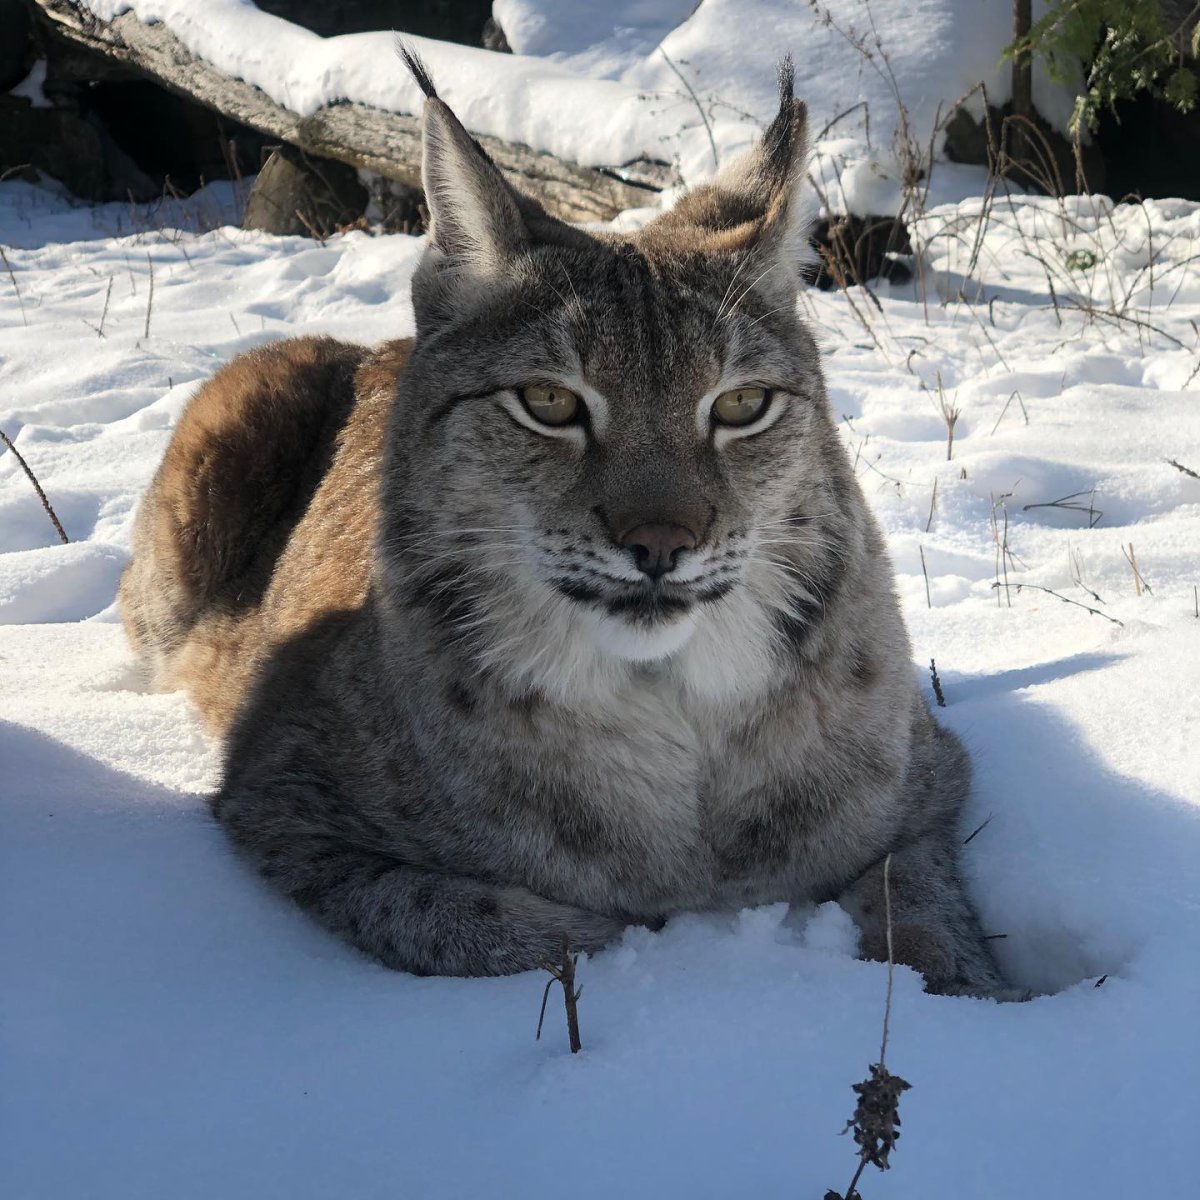 Hazard is the new lynx at the Riverview Park and Zoo in Peterborough. The zoo will be closed beginning Saturday as a precautionary measure against coronavirus.